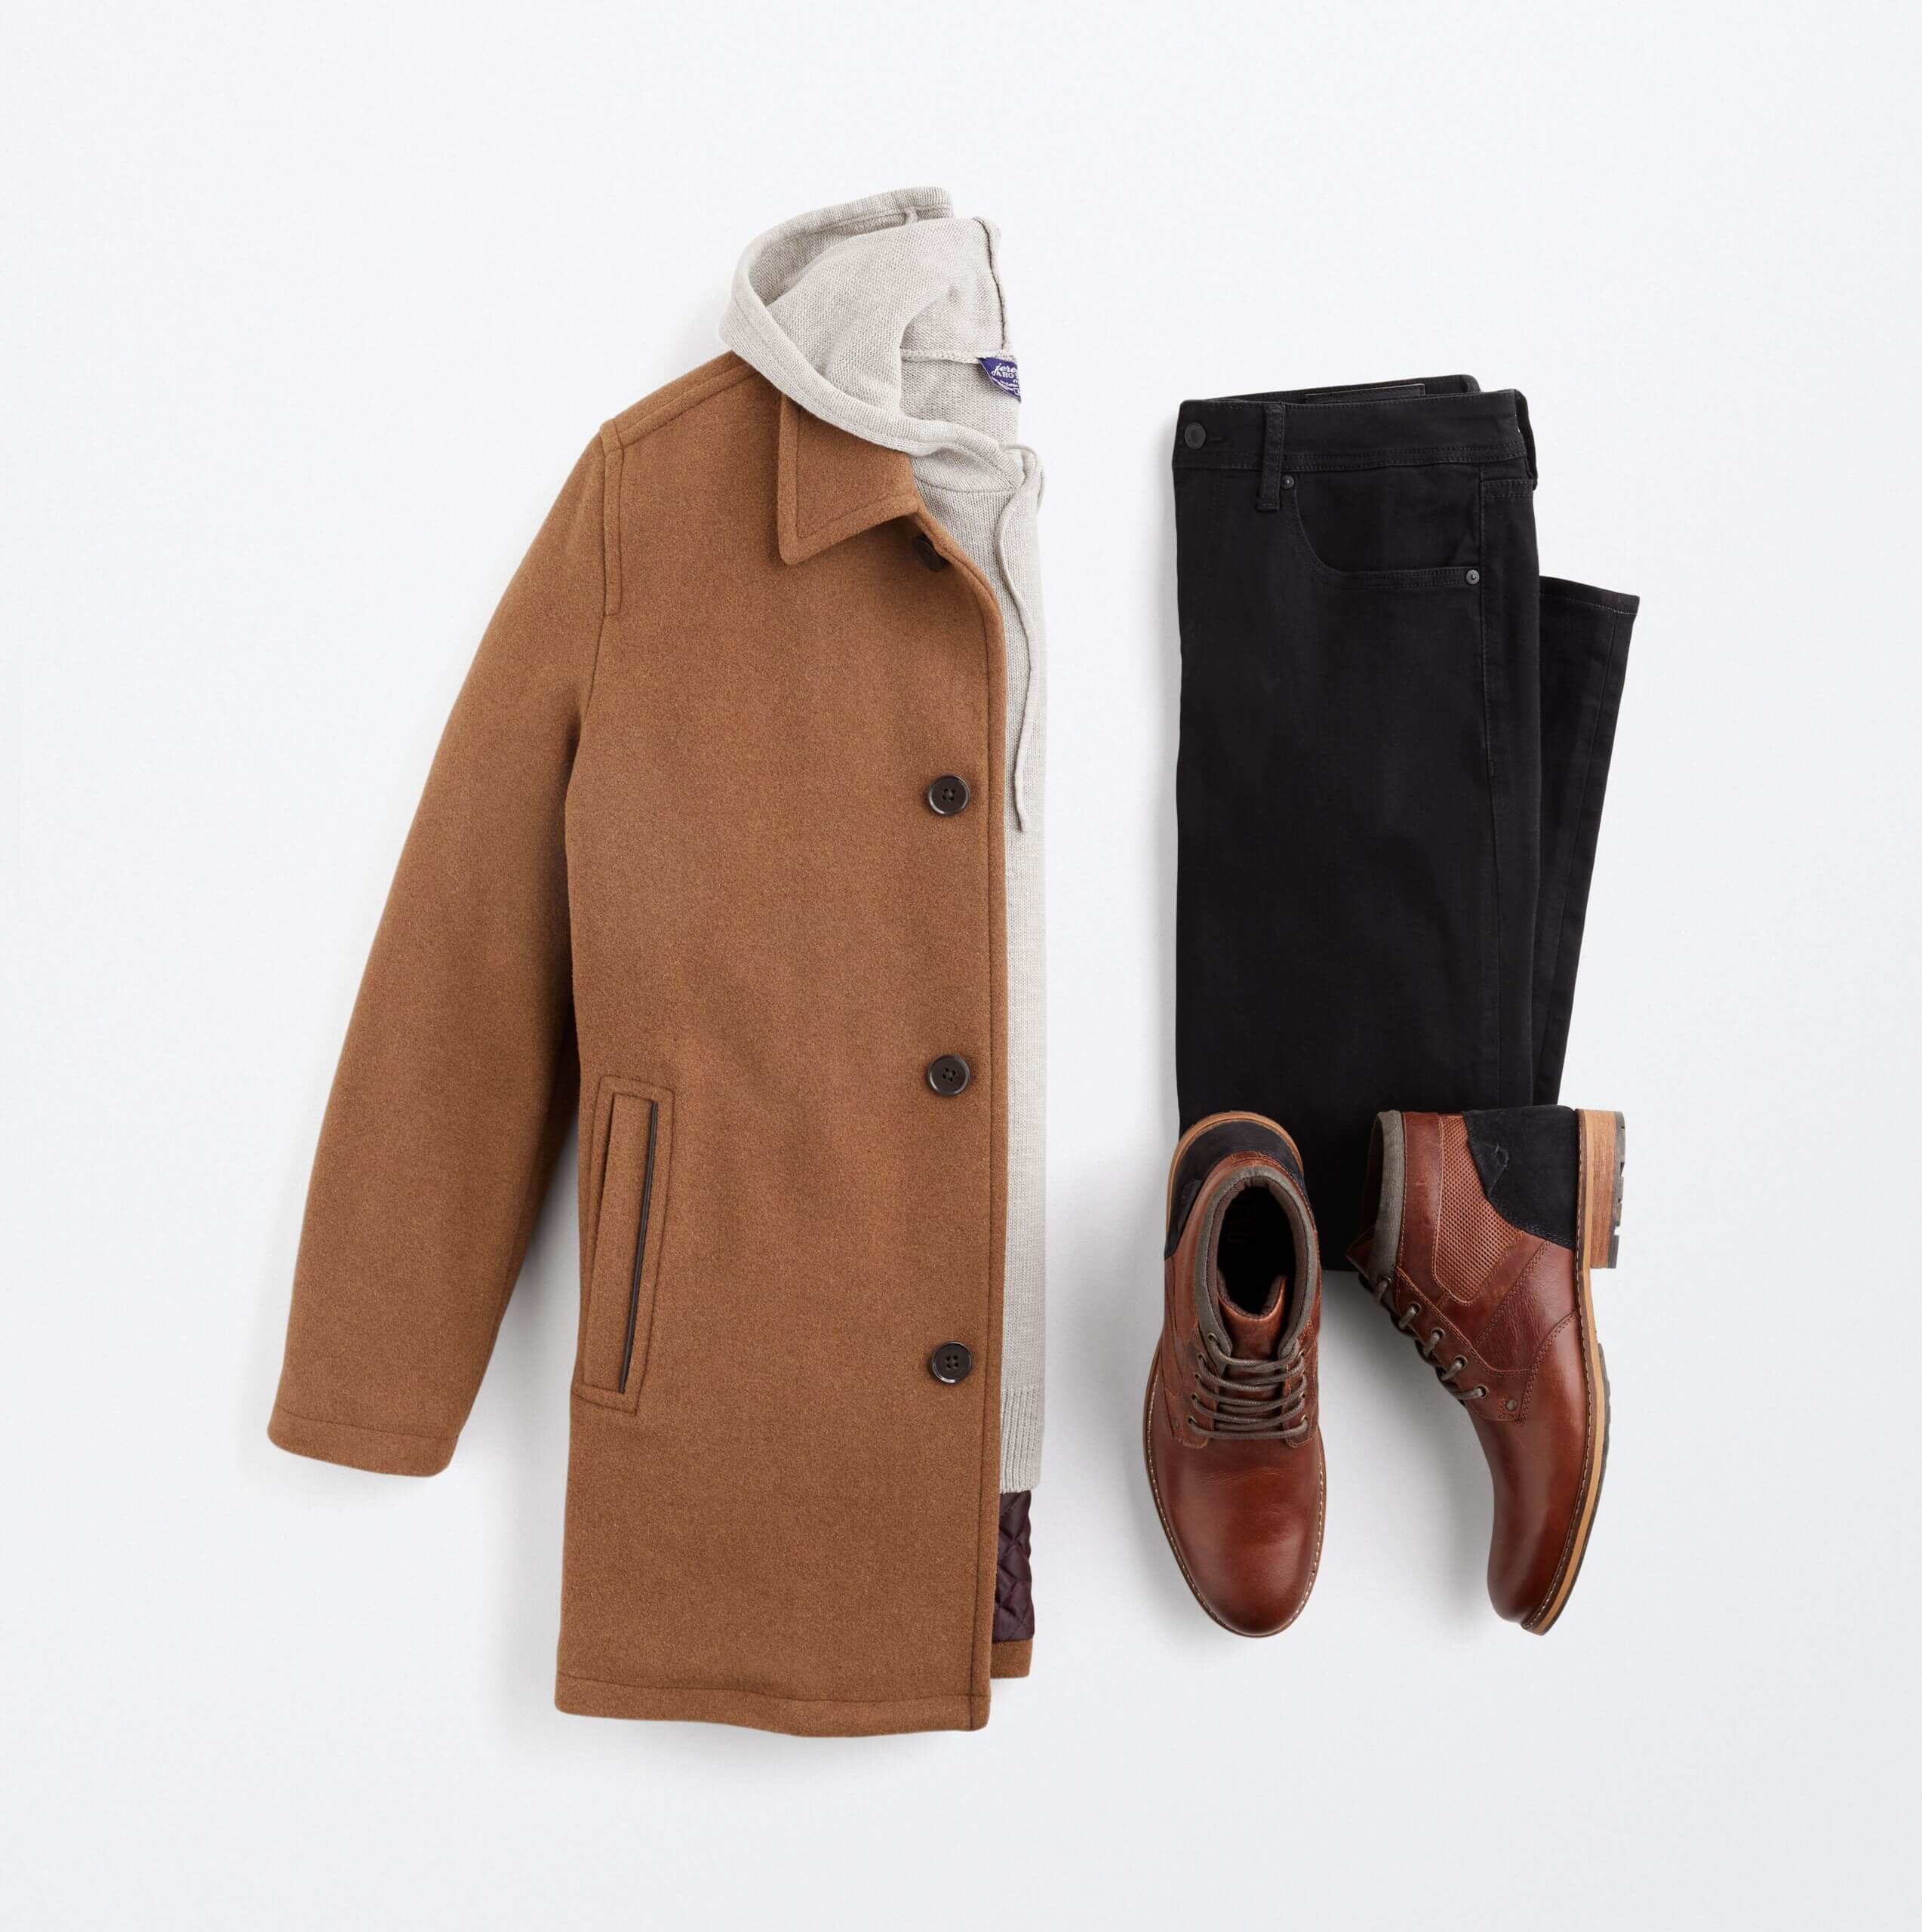 Stitch Fix men's outfit laydown featuring brown long coat over cream hoodie, black jeans and brown leather chukkas.